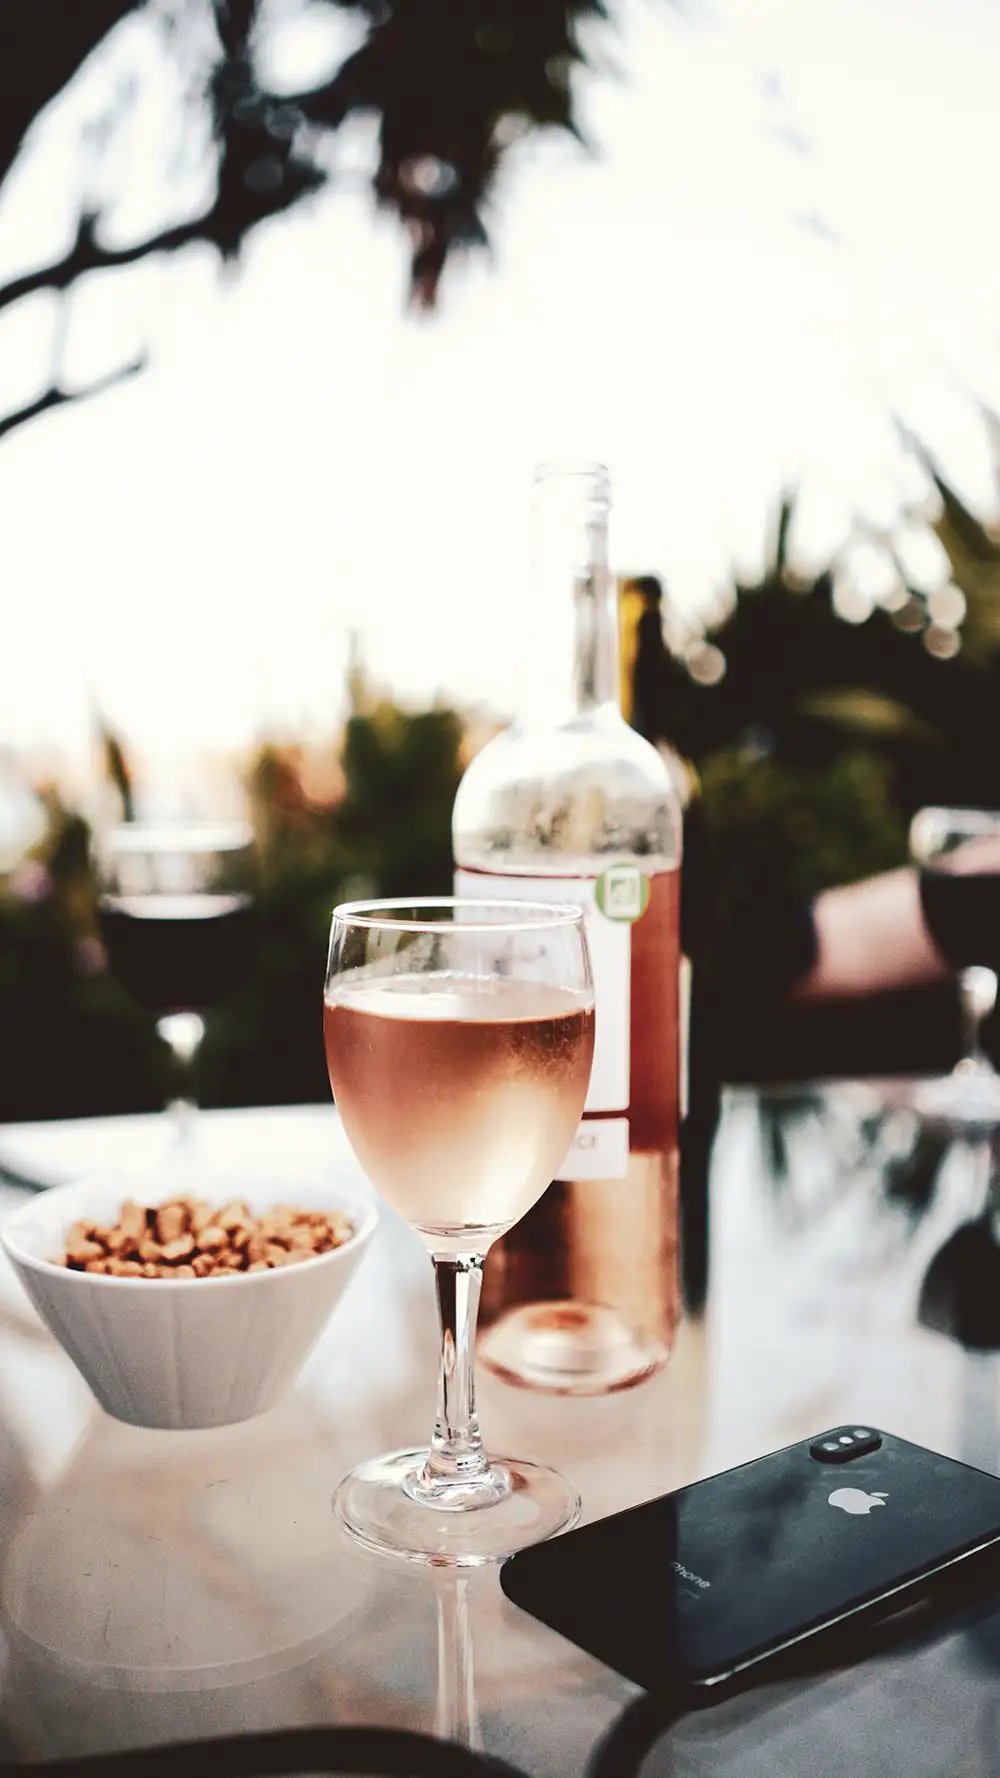 A glass of pink rose wine on an outdoor table at sunset